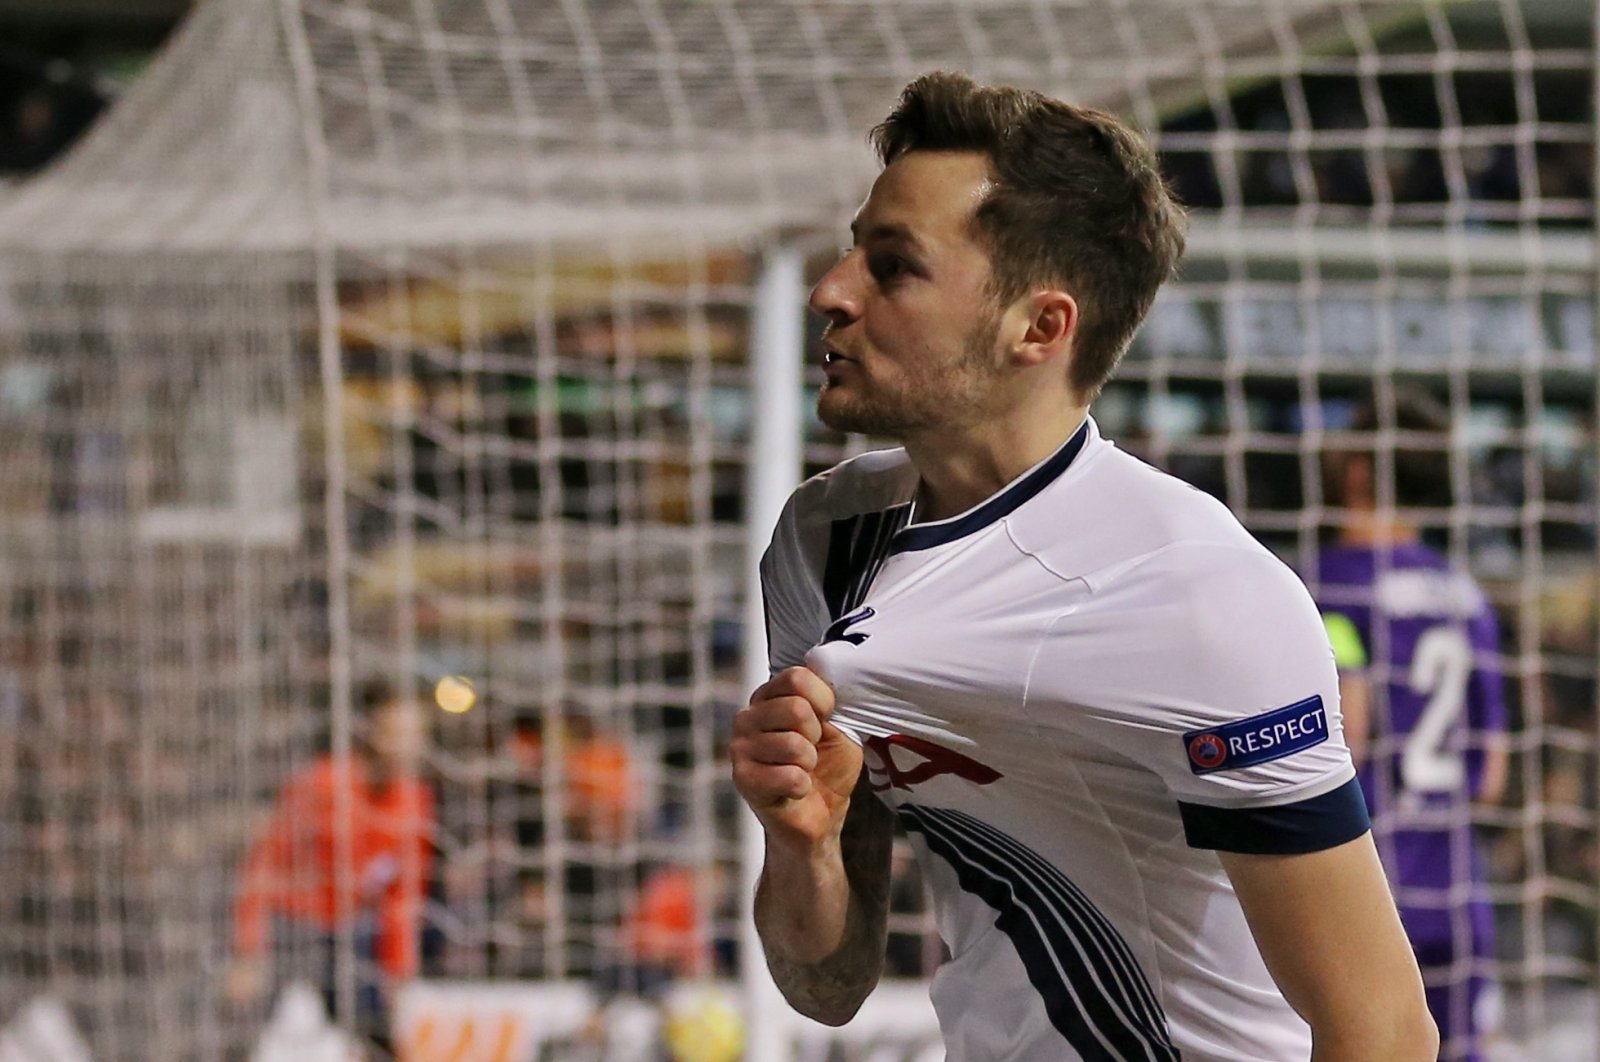 Tottenham Hotspur midfielder Ryan Mason celebrates scoring a goal during the Europa League Round of 32 second leg football match between Tottenham Hotspur and Fiorentina at the White Hart Lane in London, England, Feb. 25, 2016. (Action Images via Reuters)